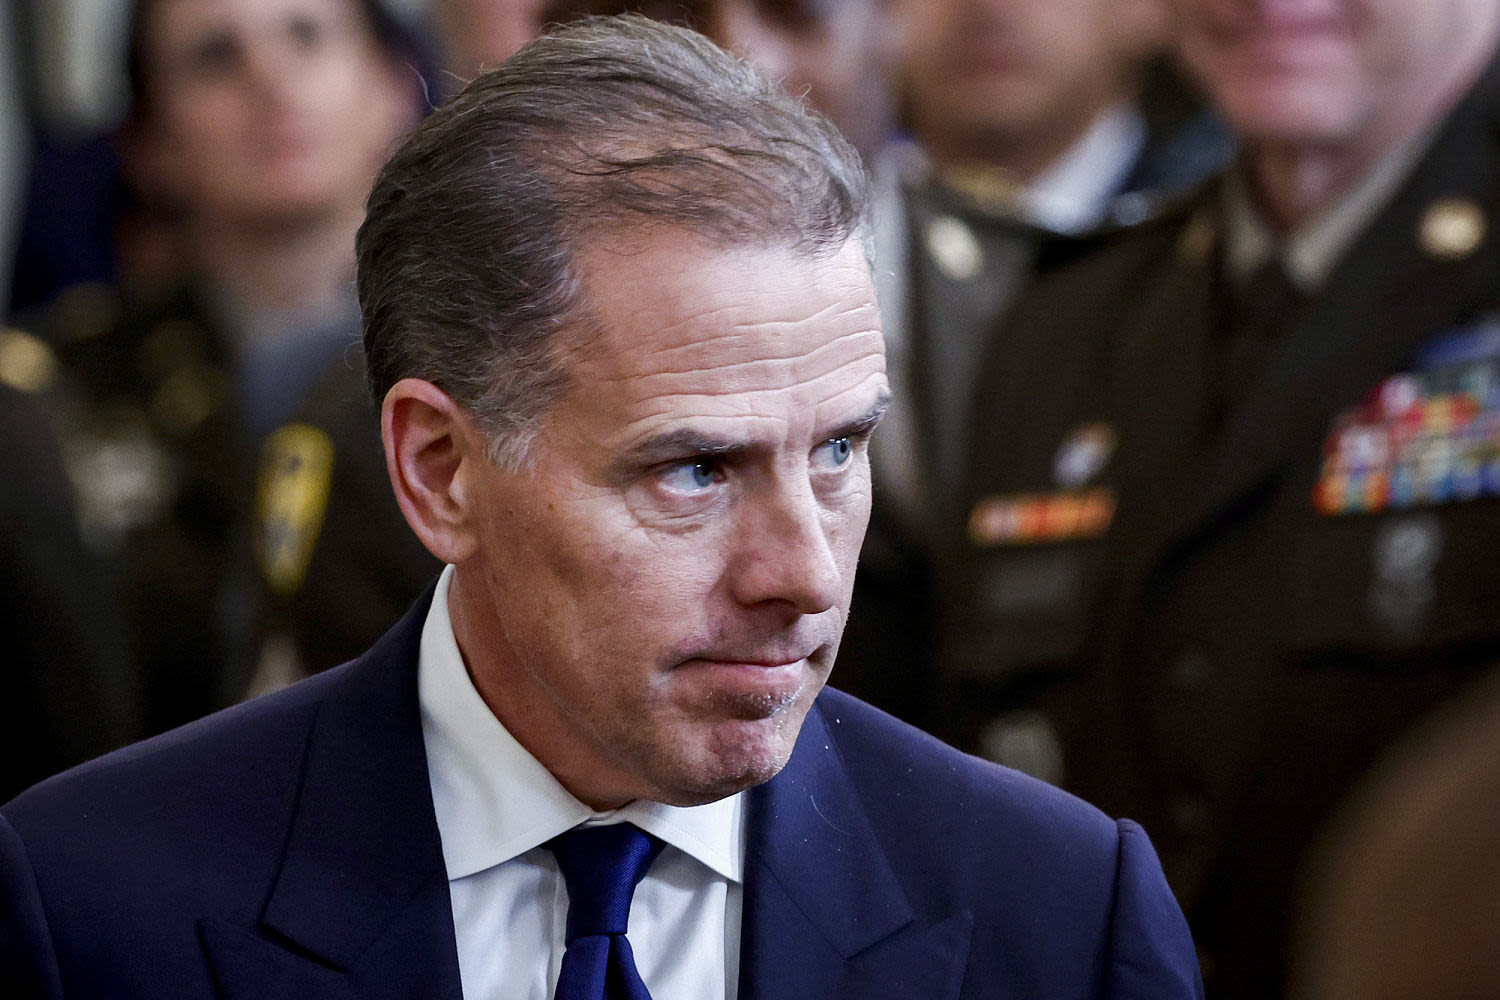 Hunter Biden argues his conviction should be tossed out, citing judge's ruling in Trump documents case